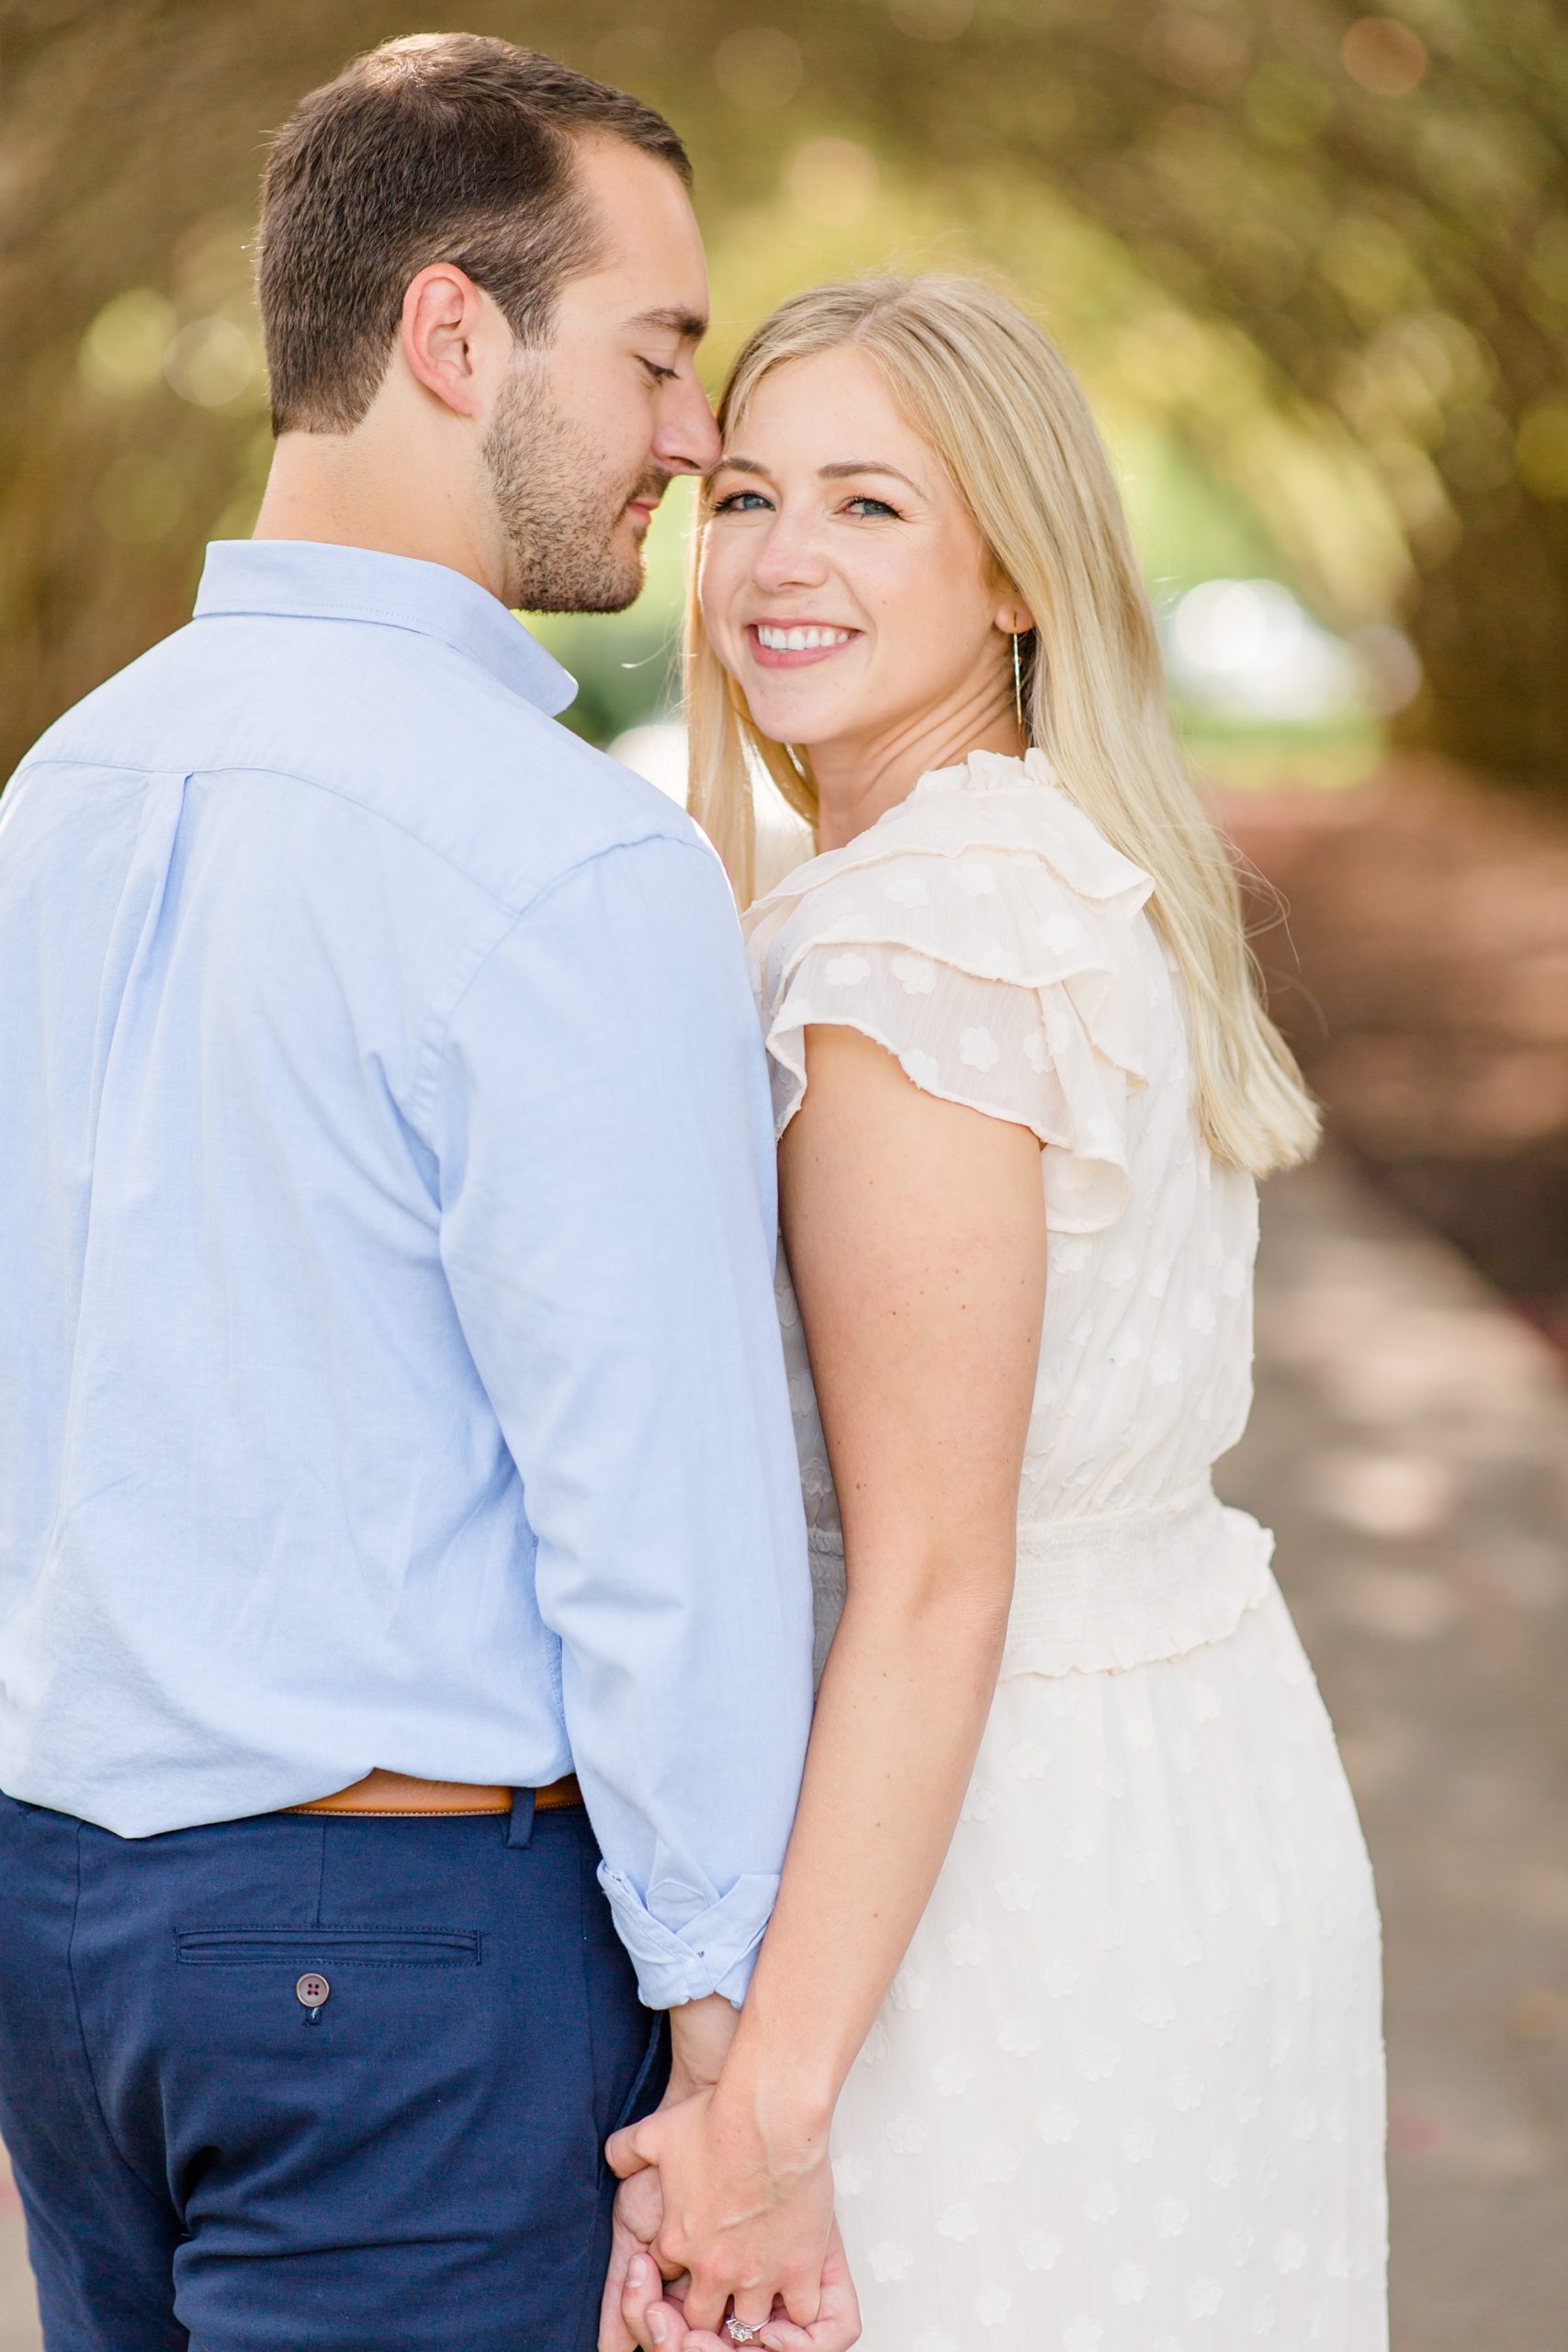 groom kisses bride on temple during engagement session